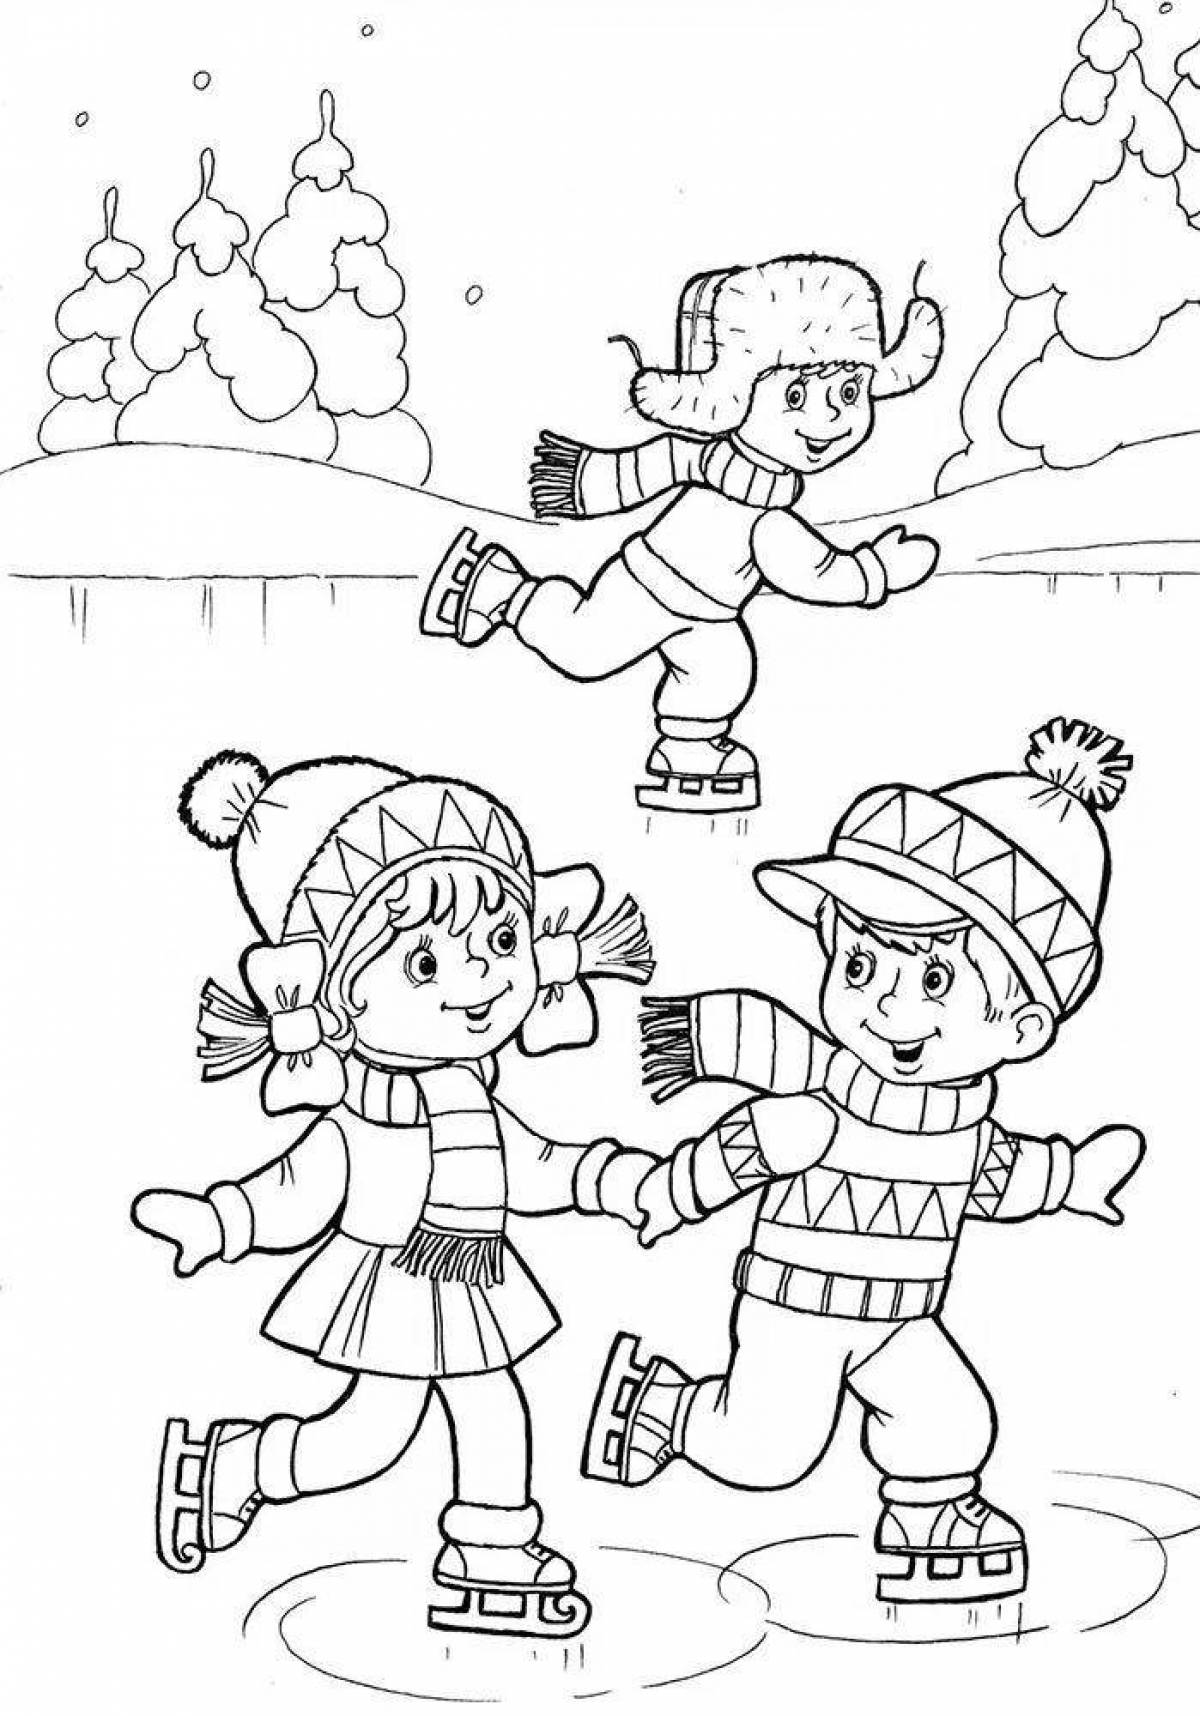 Colorful coloring drawing of winter fun